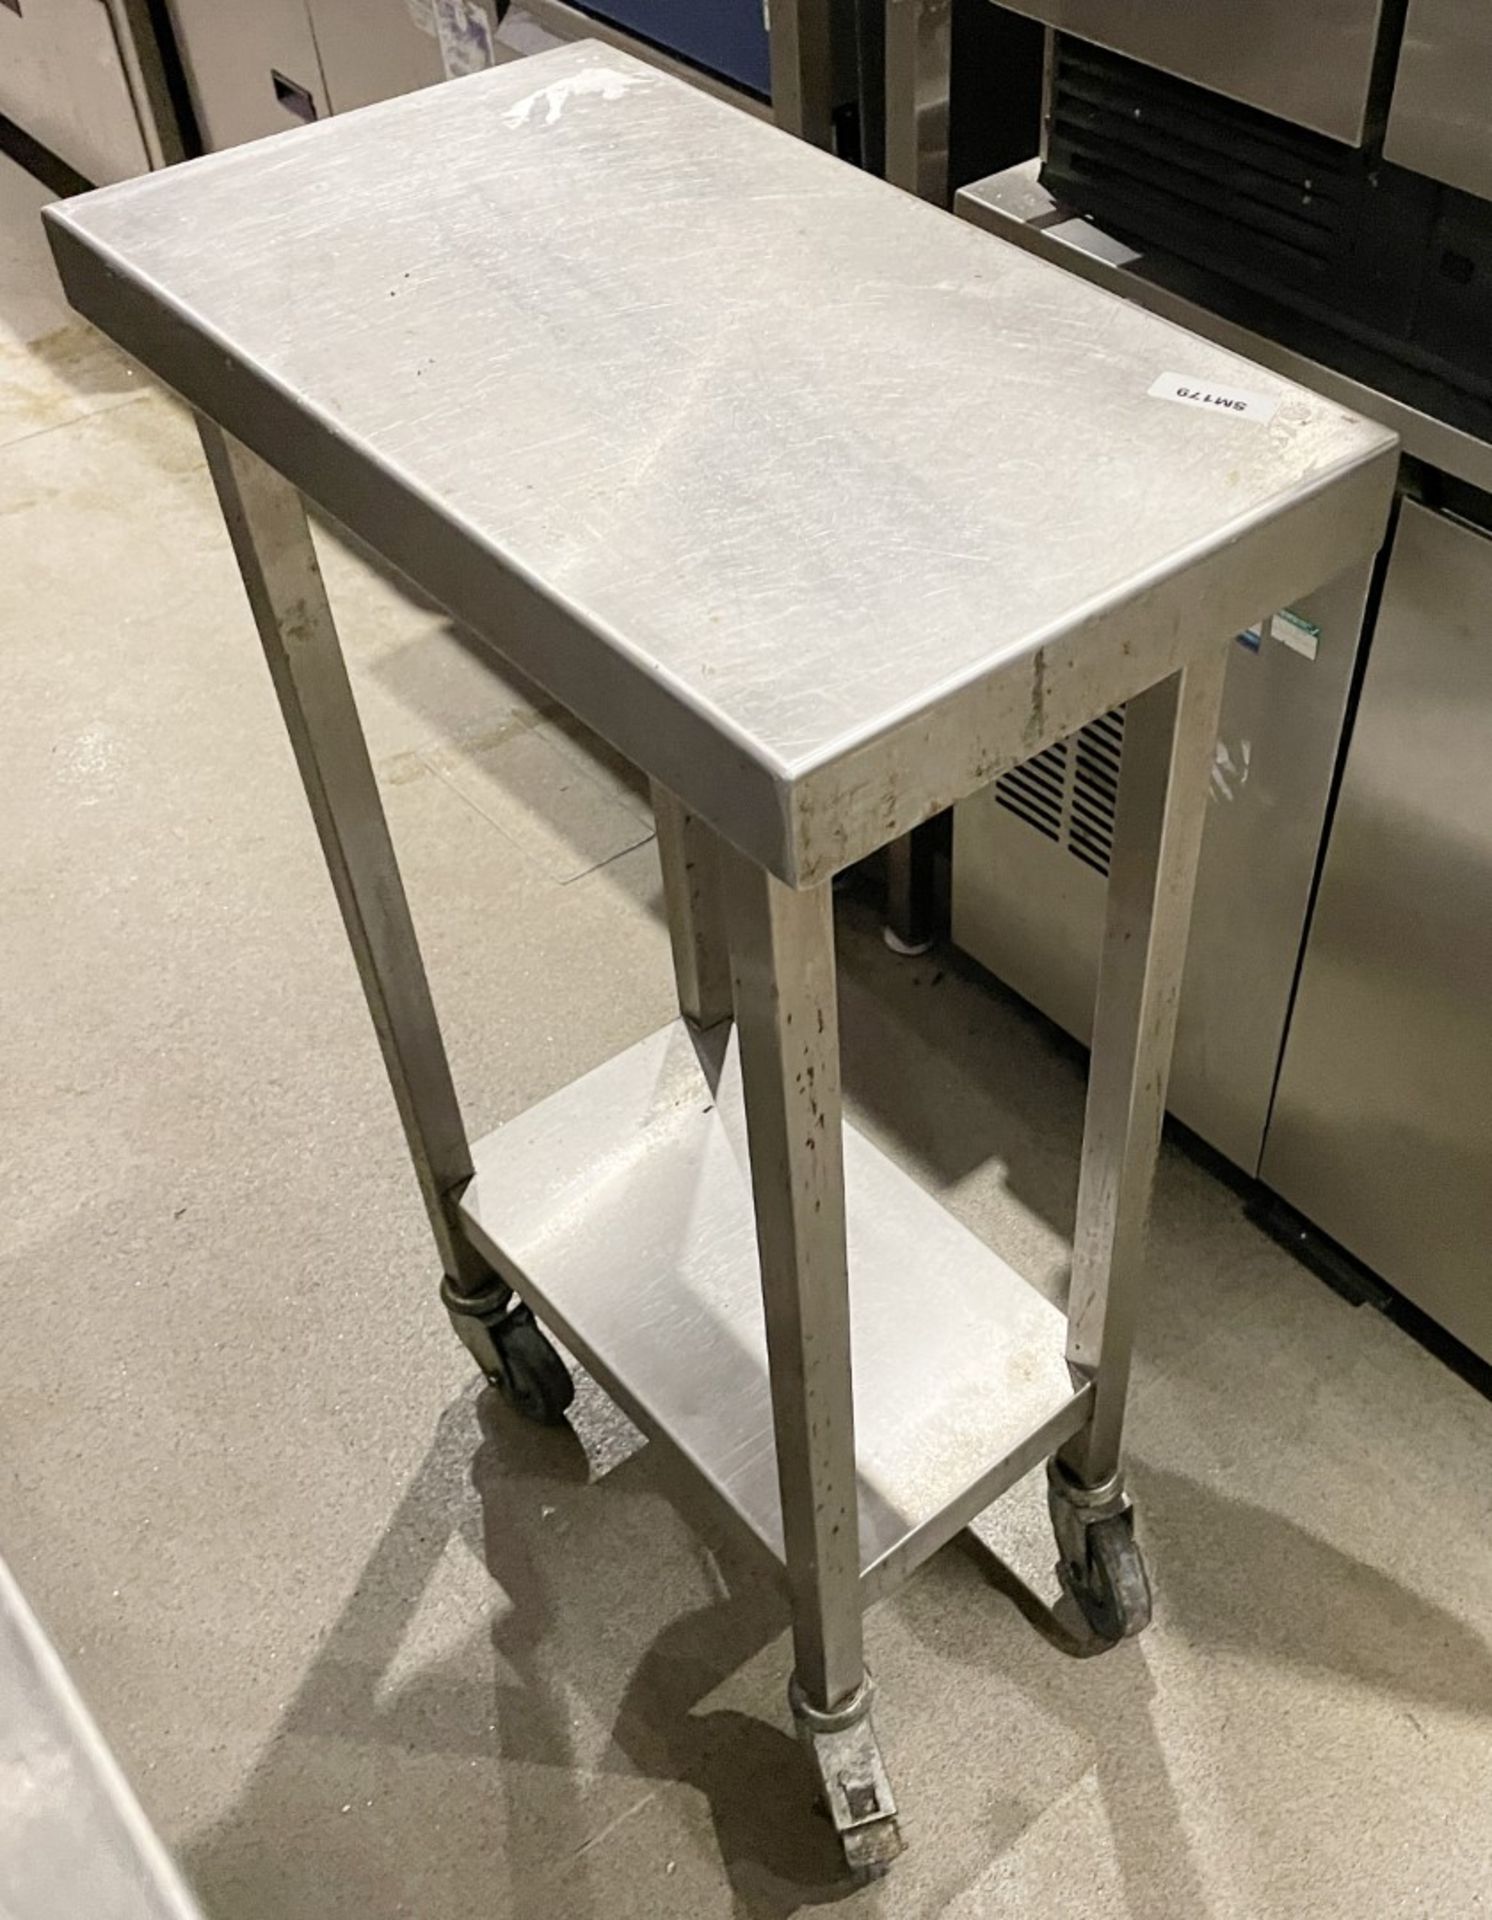 1 x Stainless Steel Mobile Prep Island on Lockable Castors - Dimensions: H90 x W30 x D55 cms - Image 3 of 5